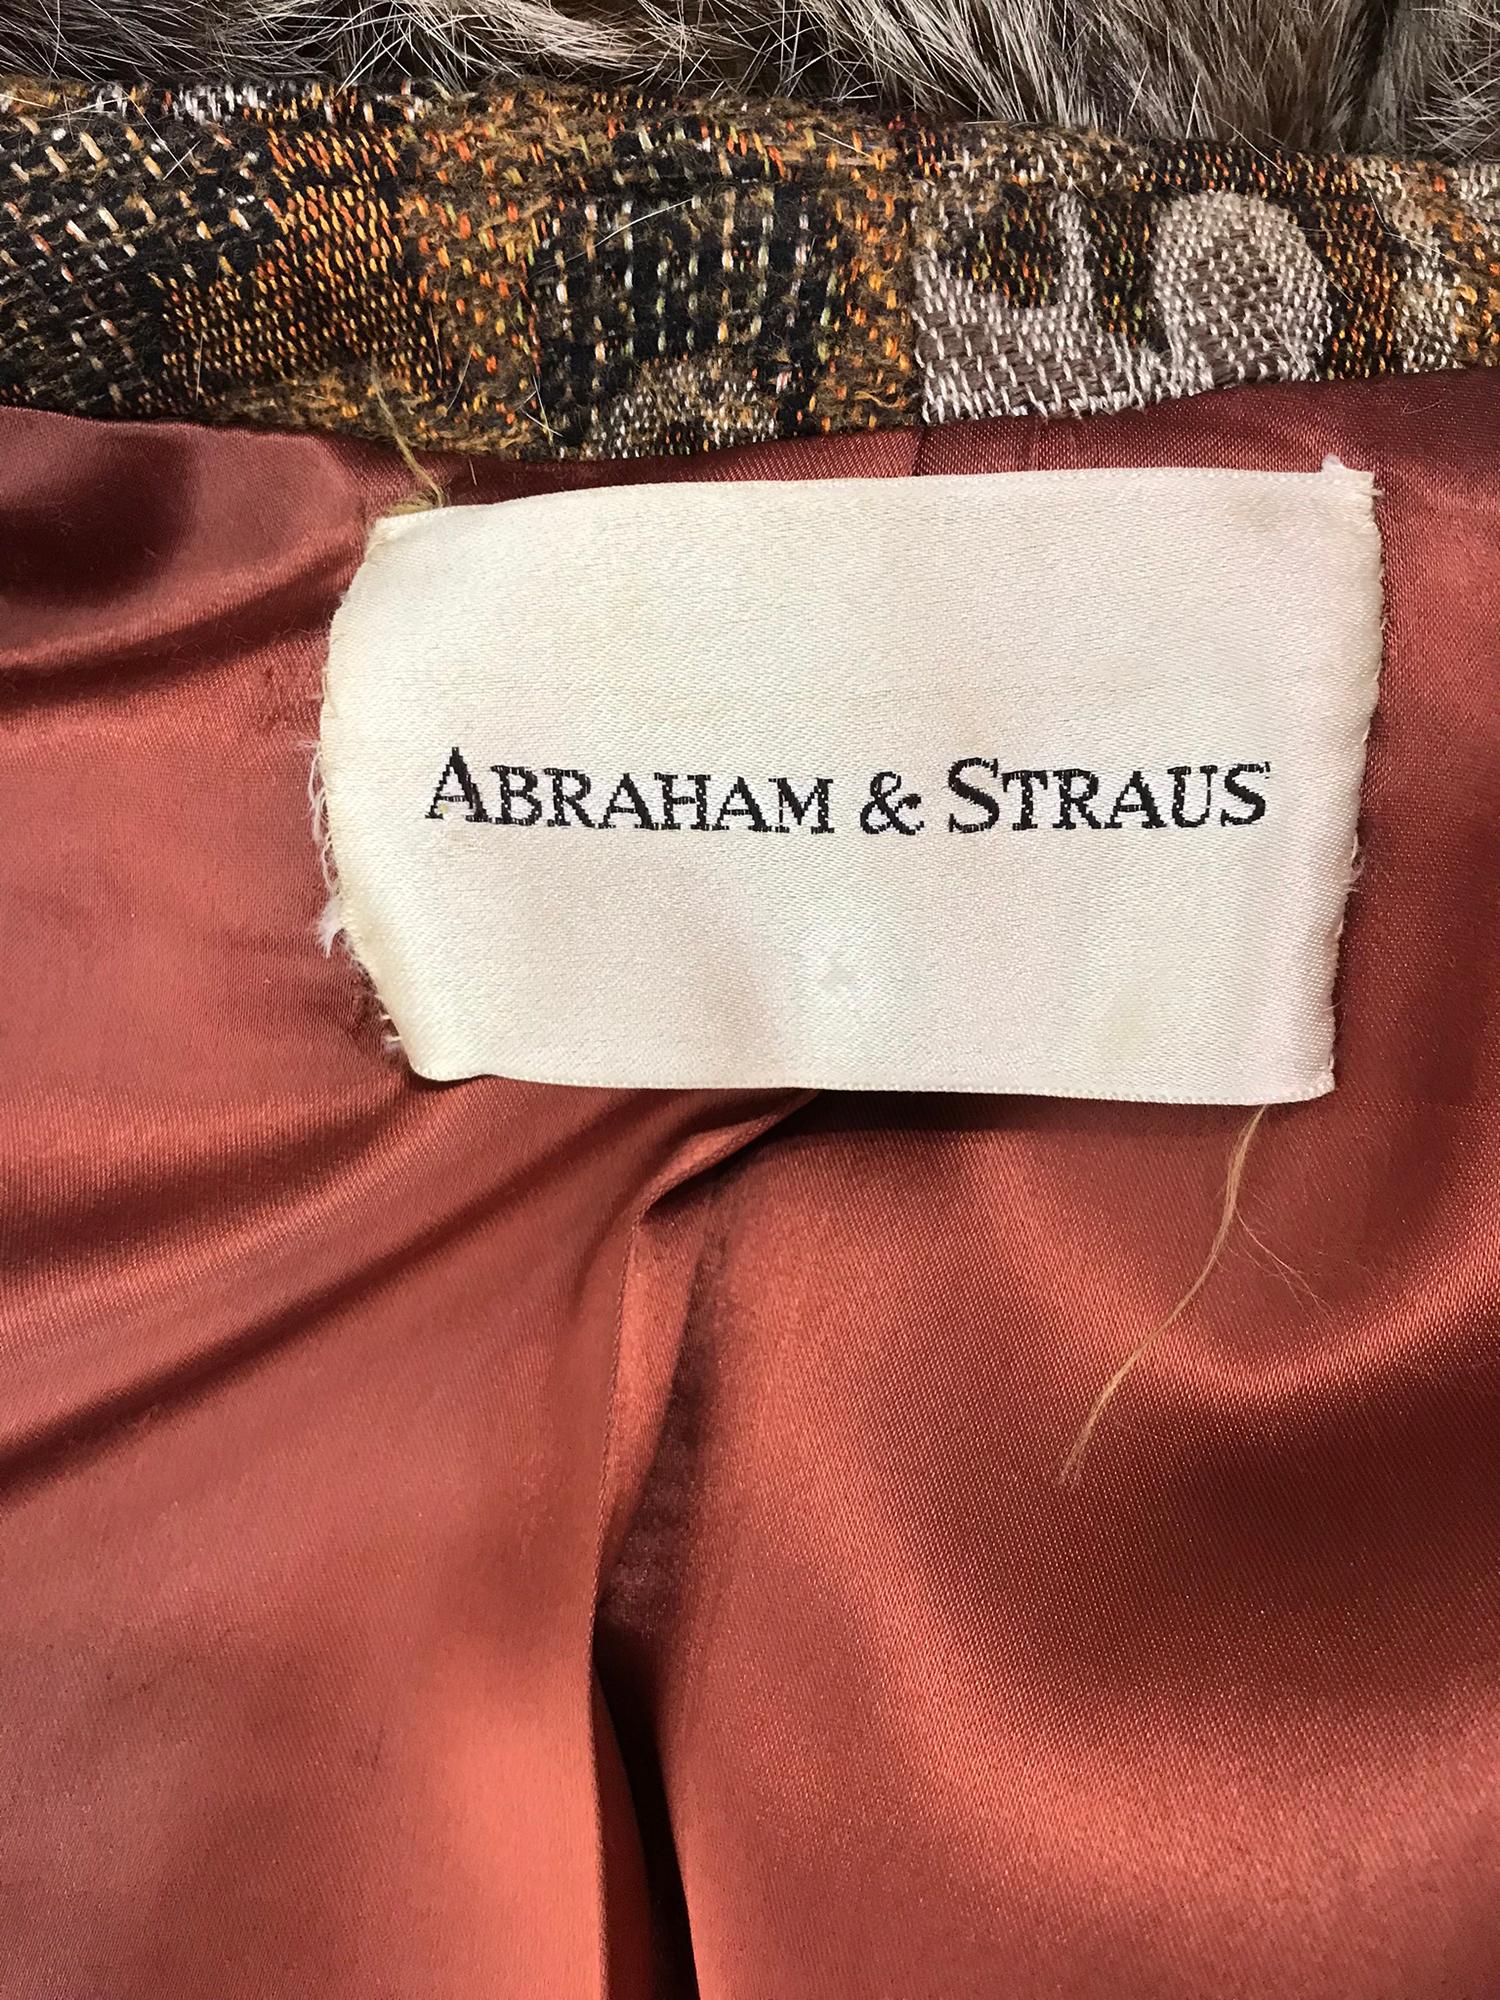 Abraham & Straus Tapestry coat with fur collar and wrap belt, 1960s  6